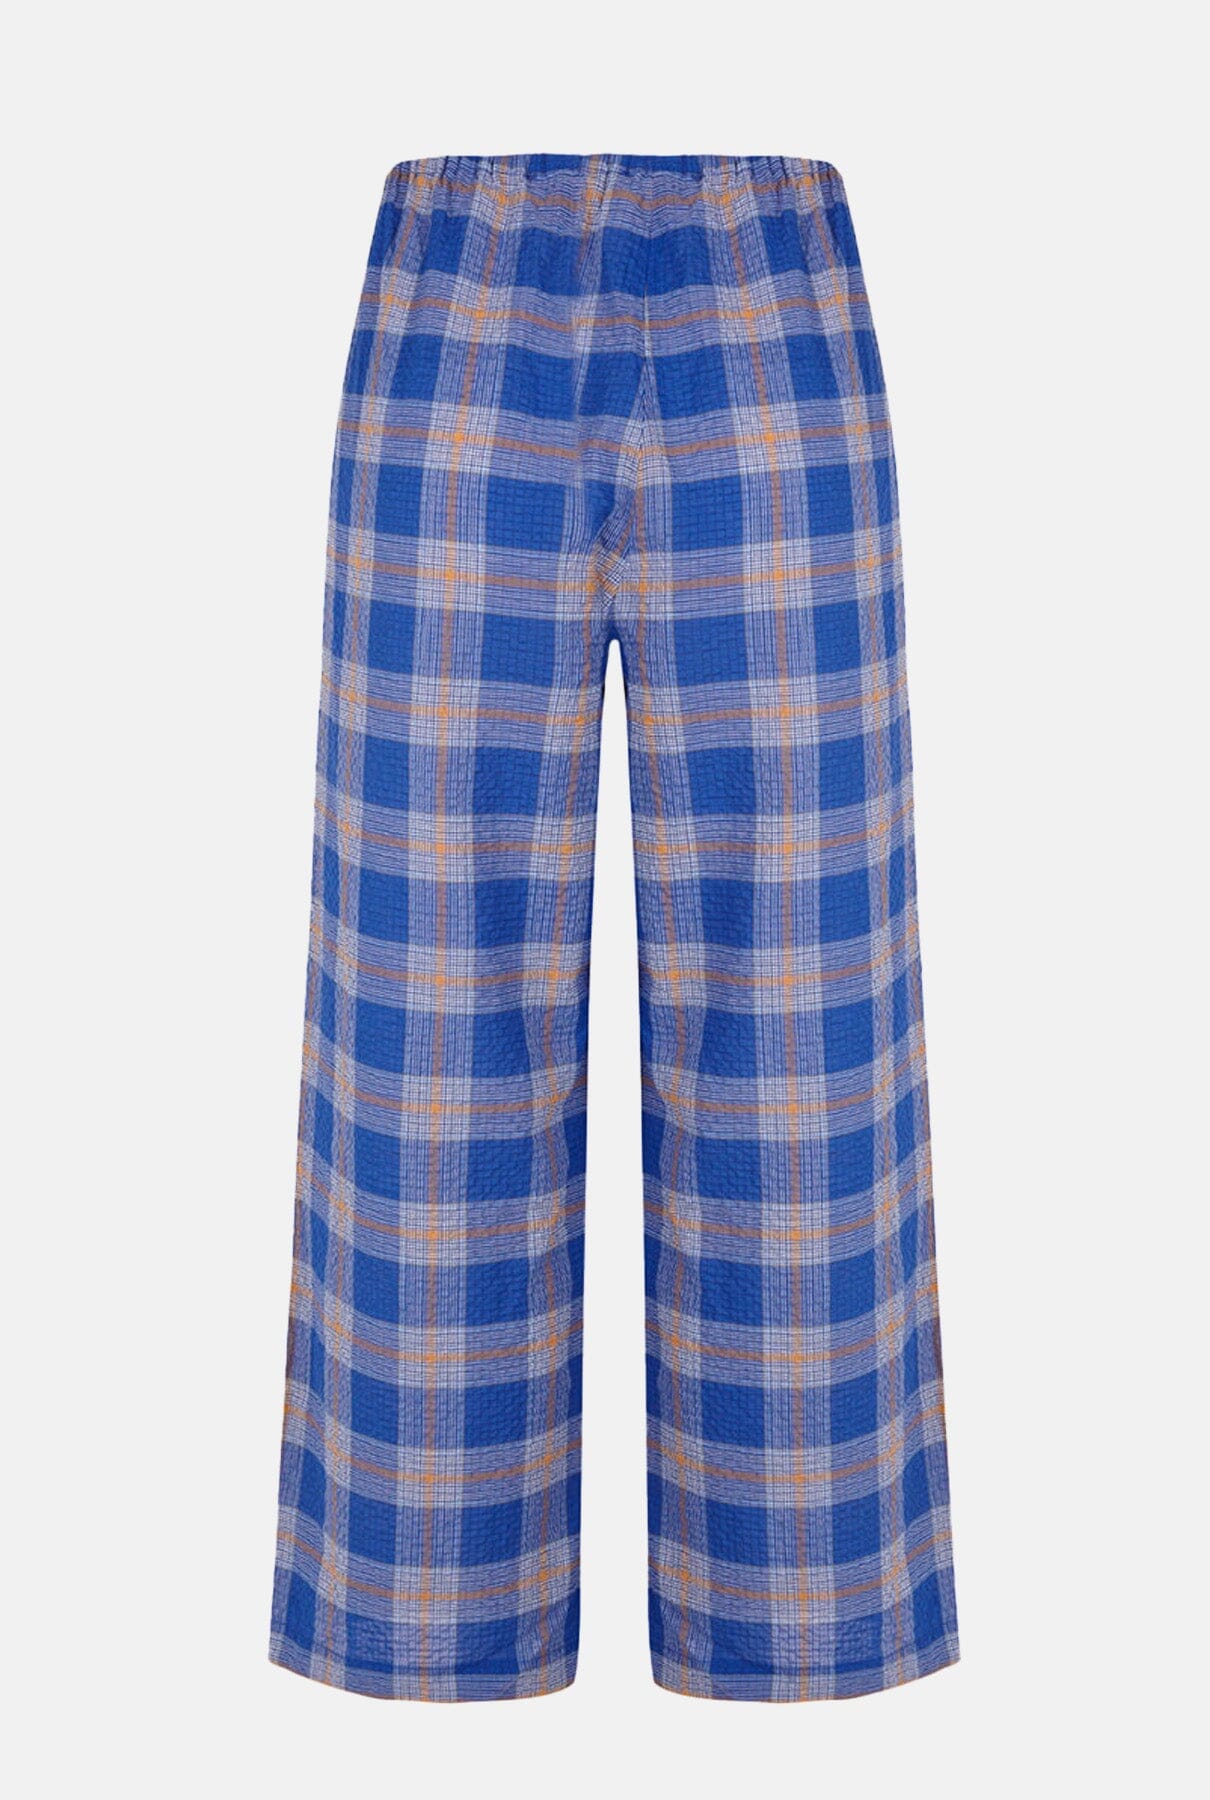 Madeira Trousers Trousers Amlul 